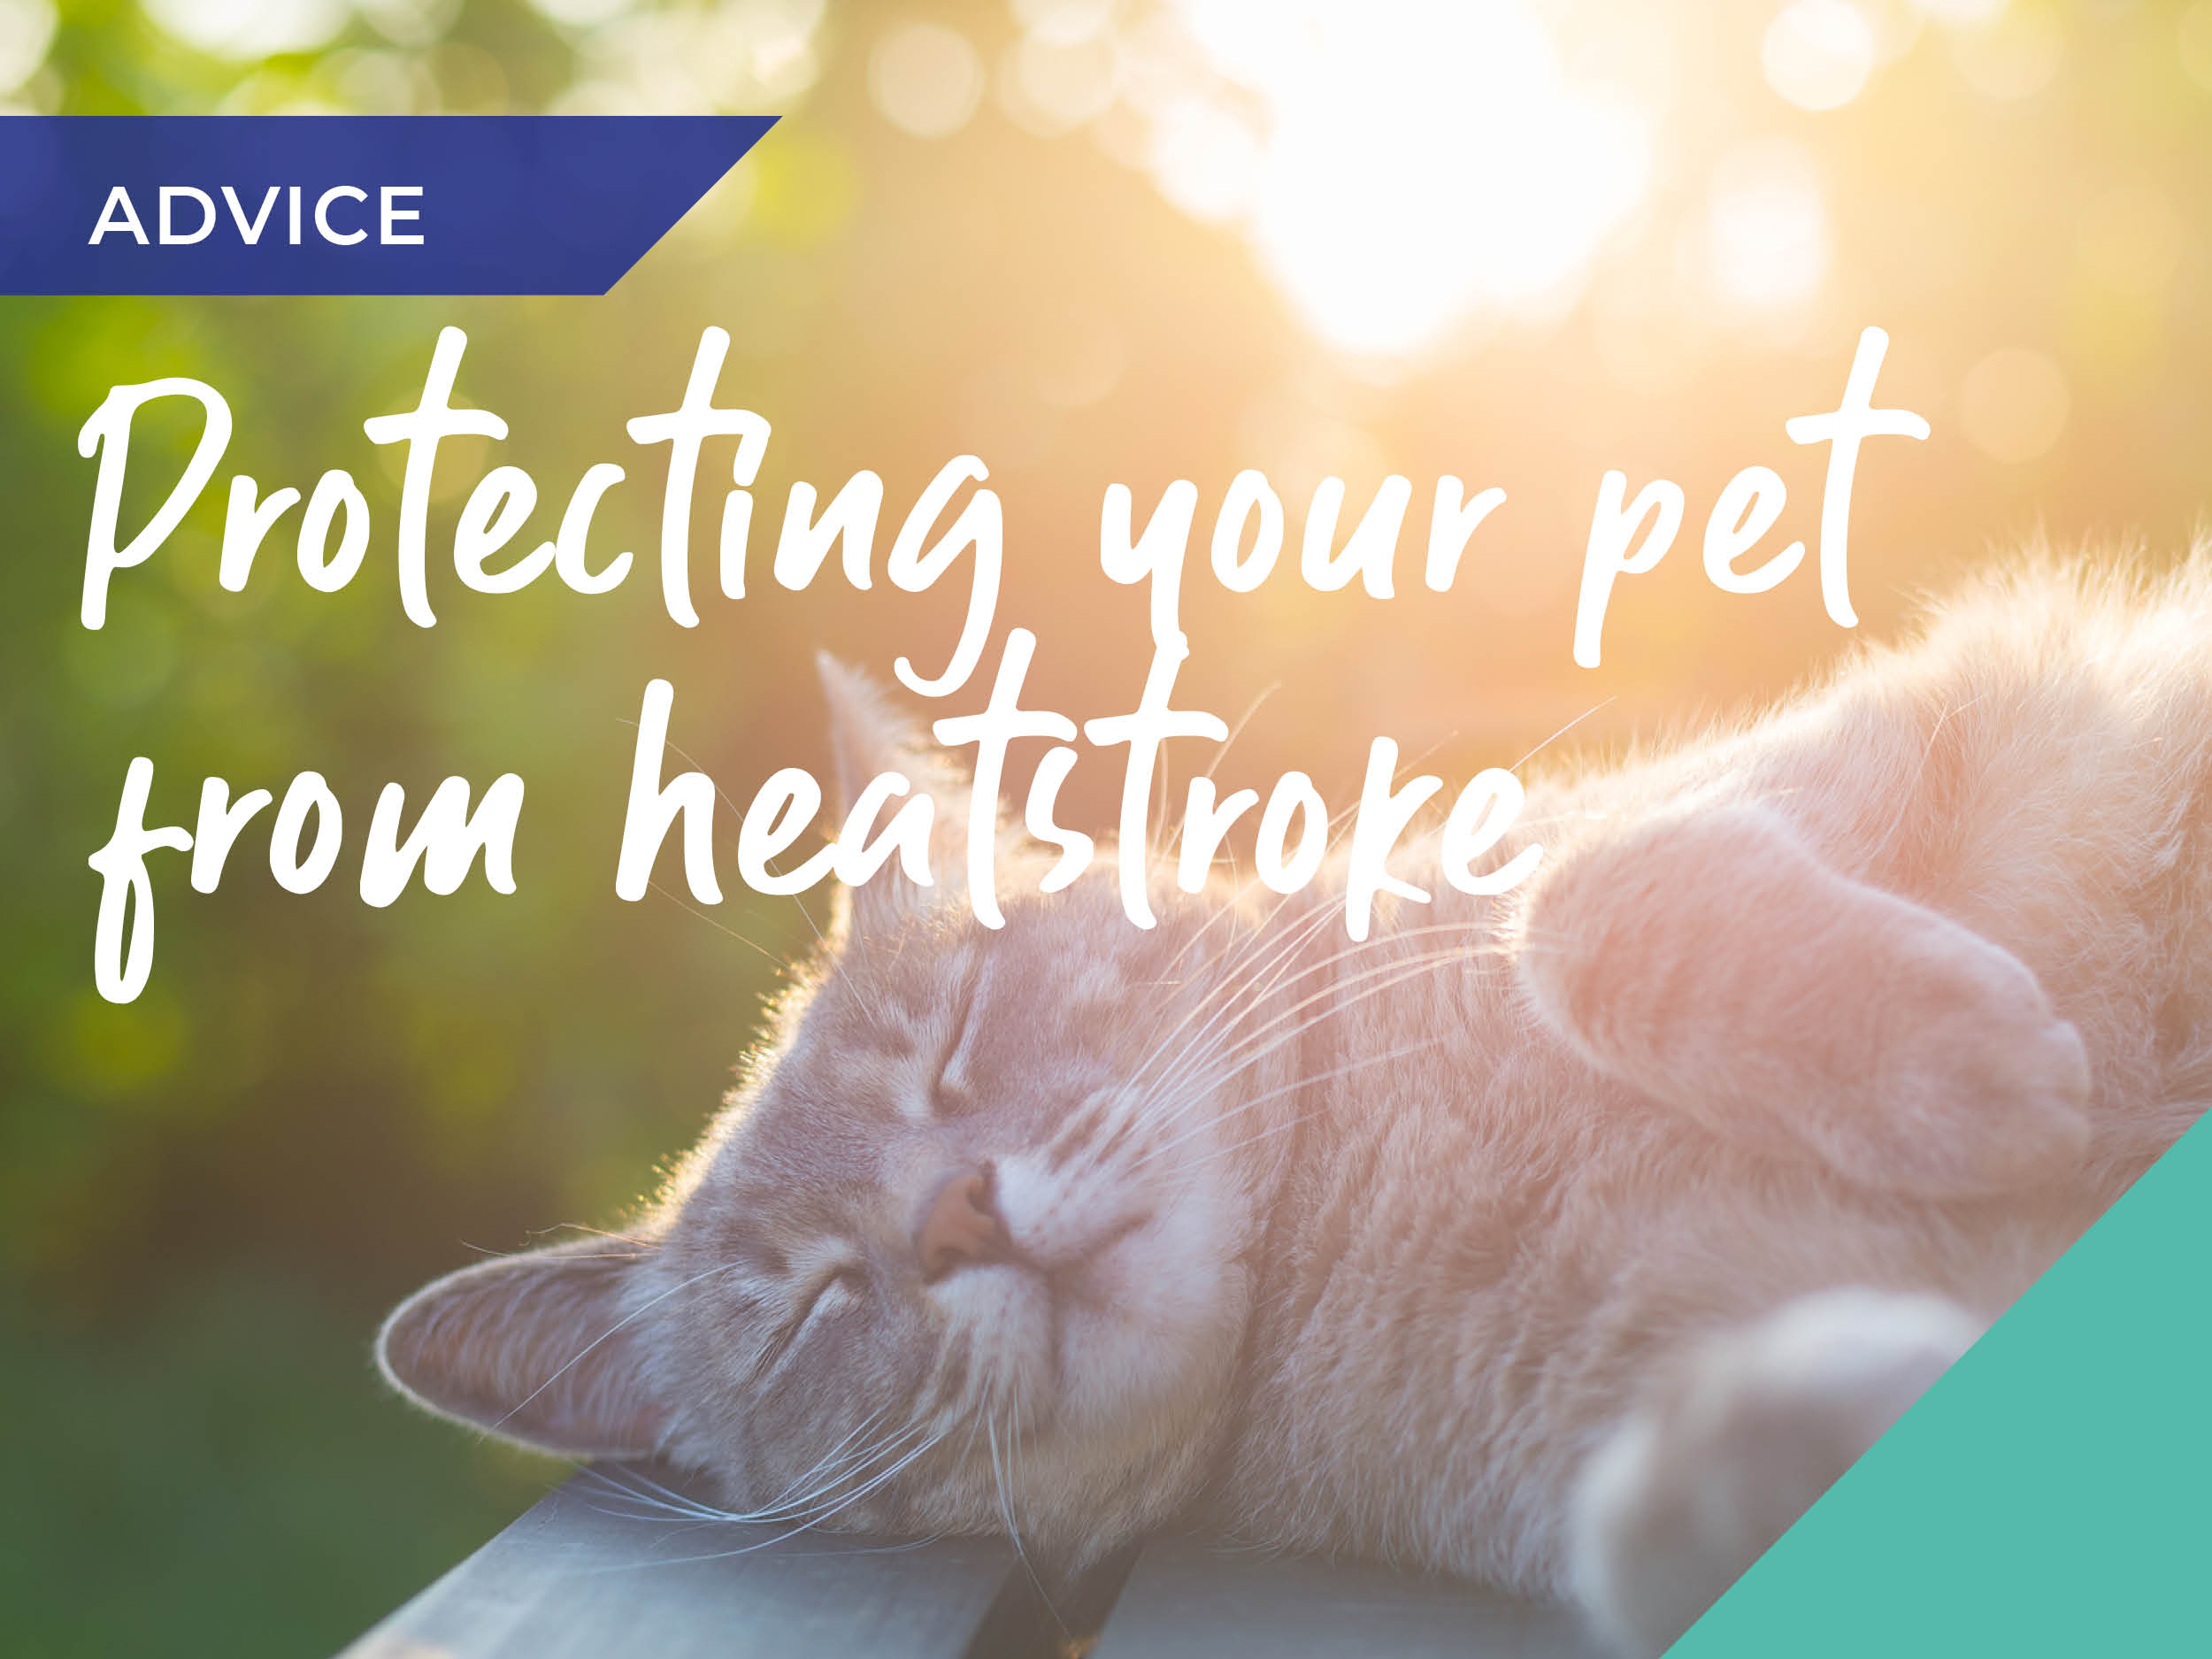 Protect your pet from the sun